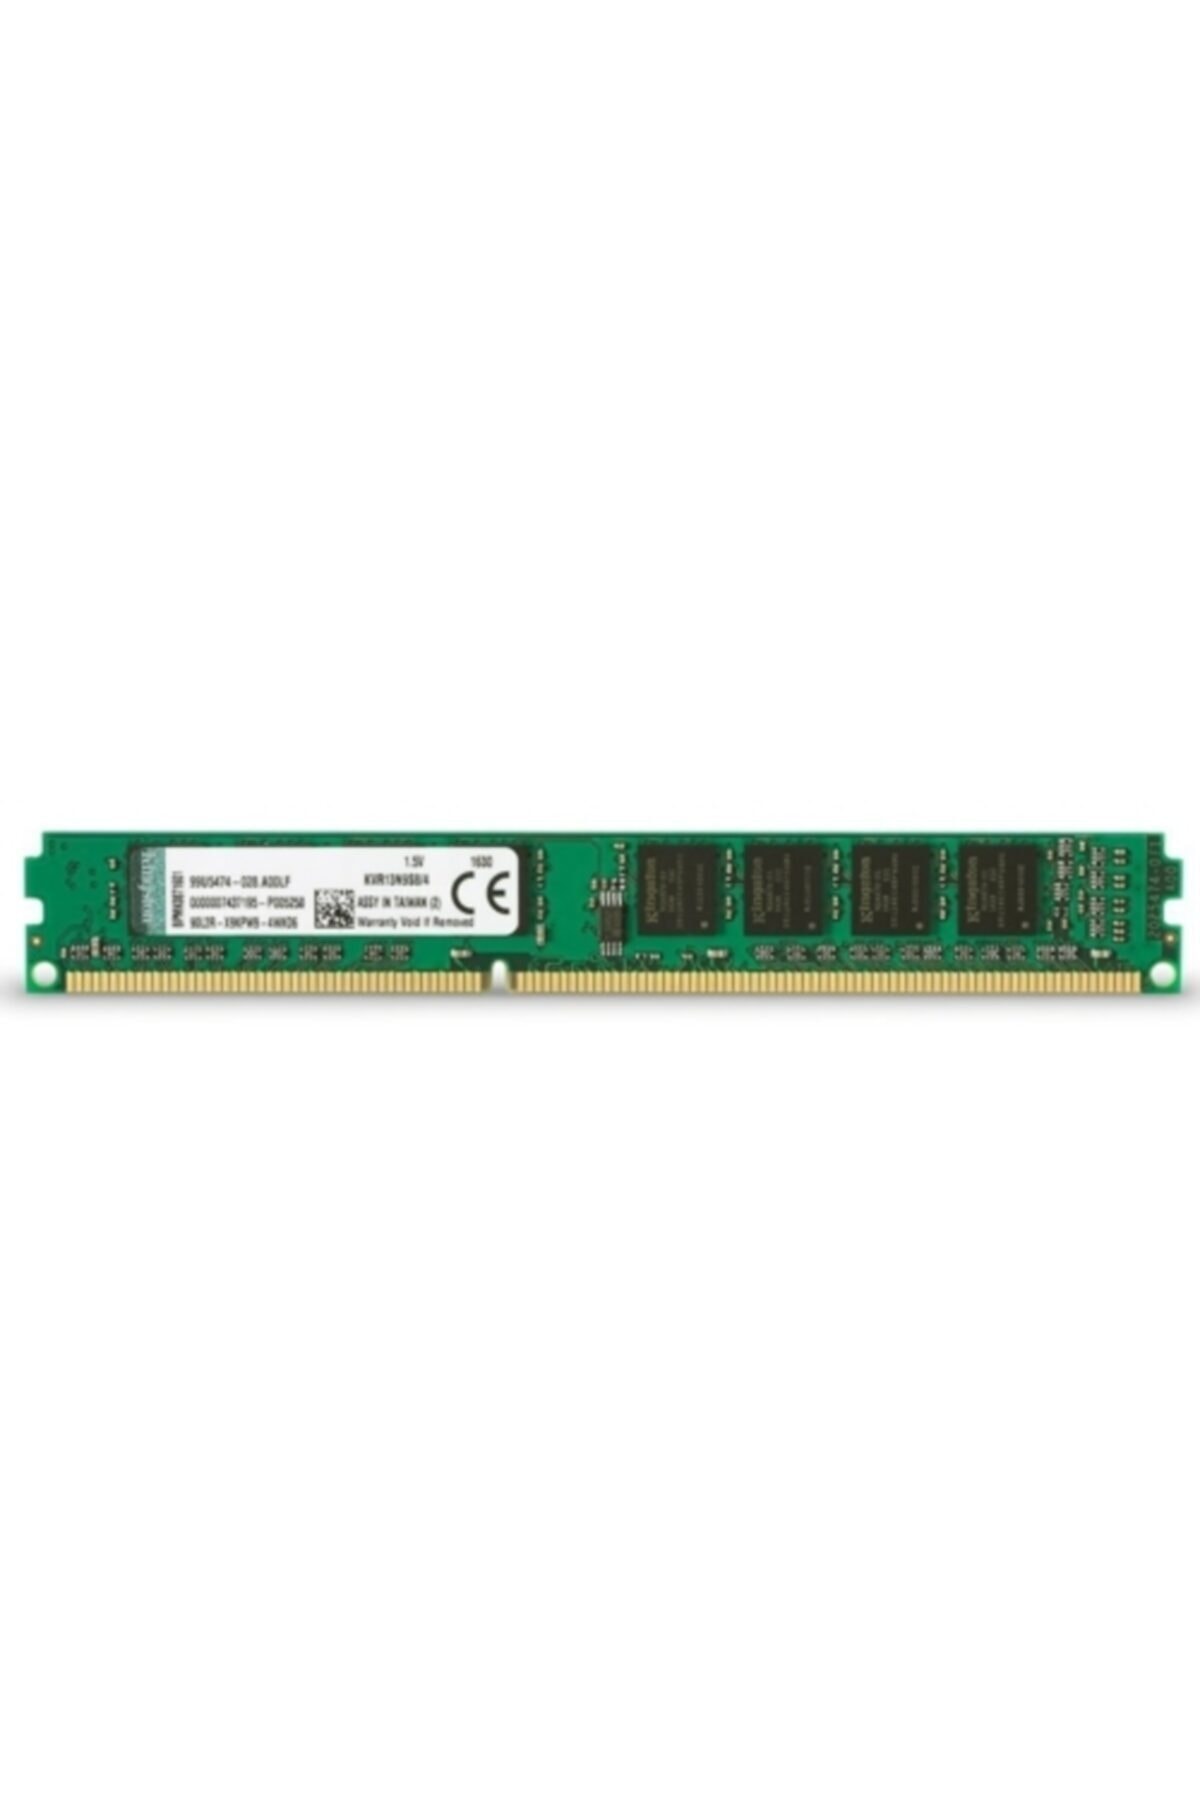 4gb 1333mhz Ddr3 Cl9 Kvr13n9s8/4